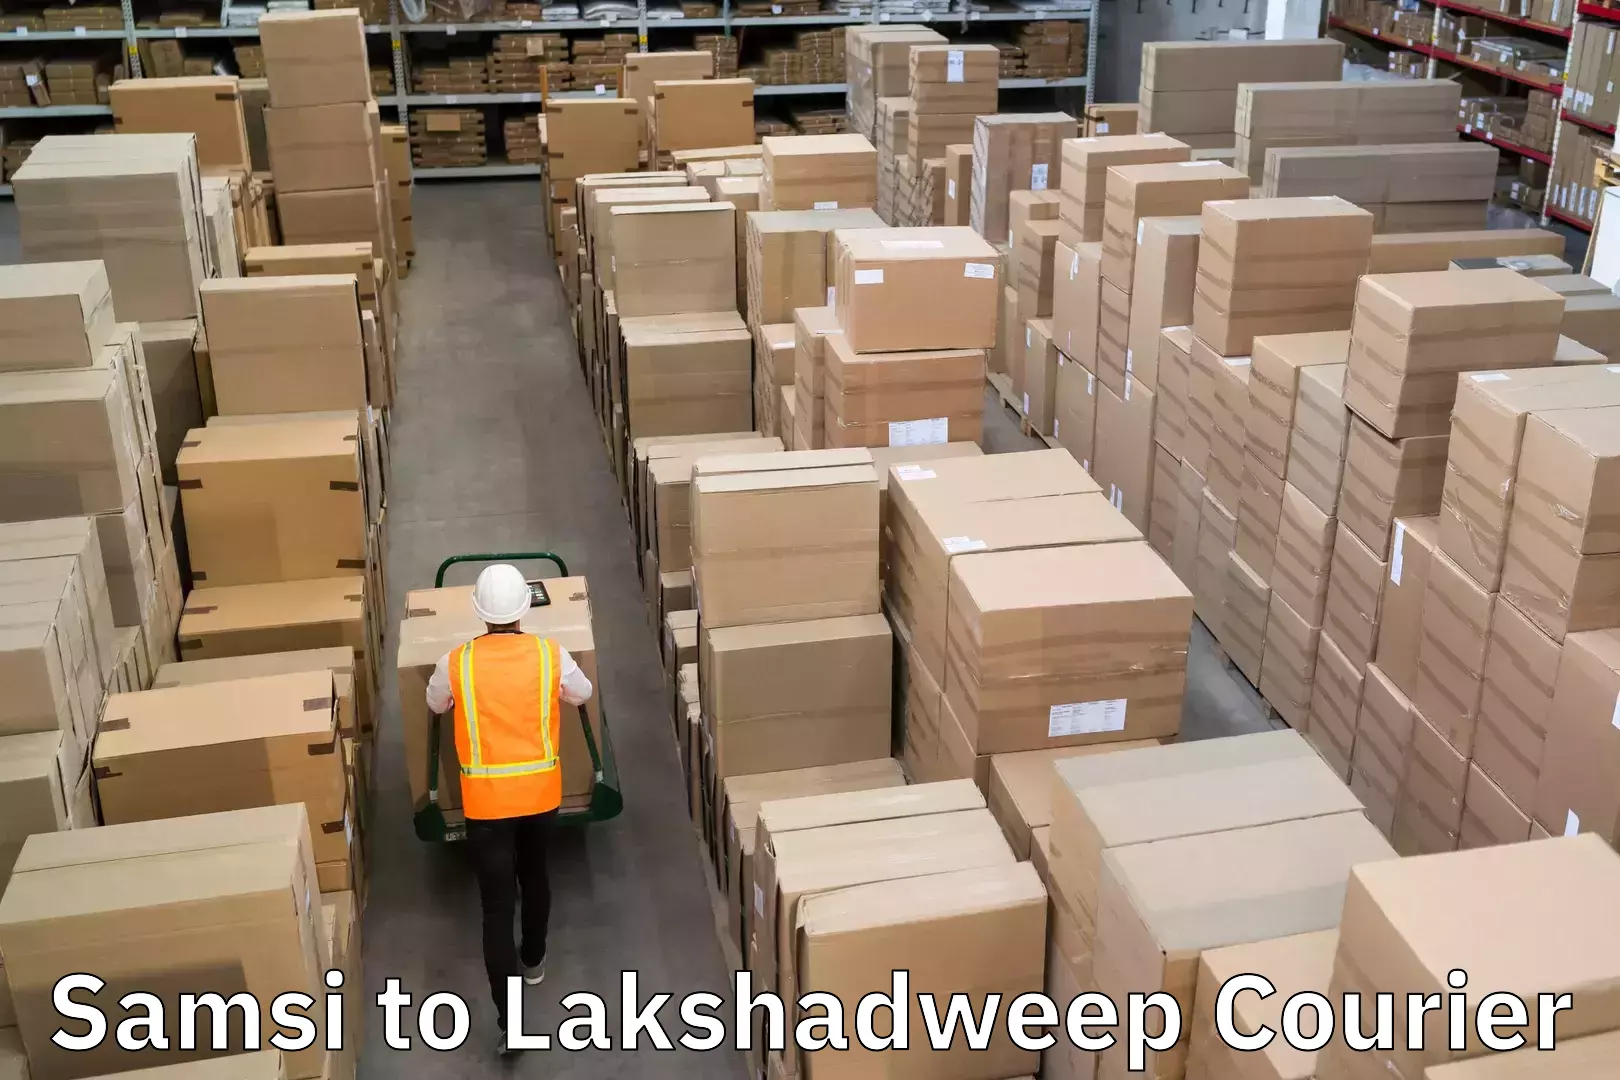 State-of-the-art courier technology Samsi to Lakshadweep